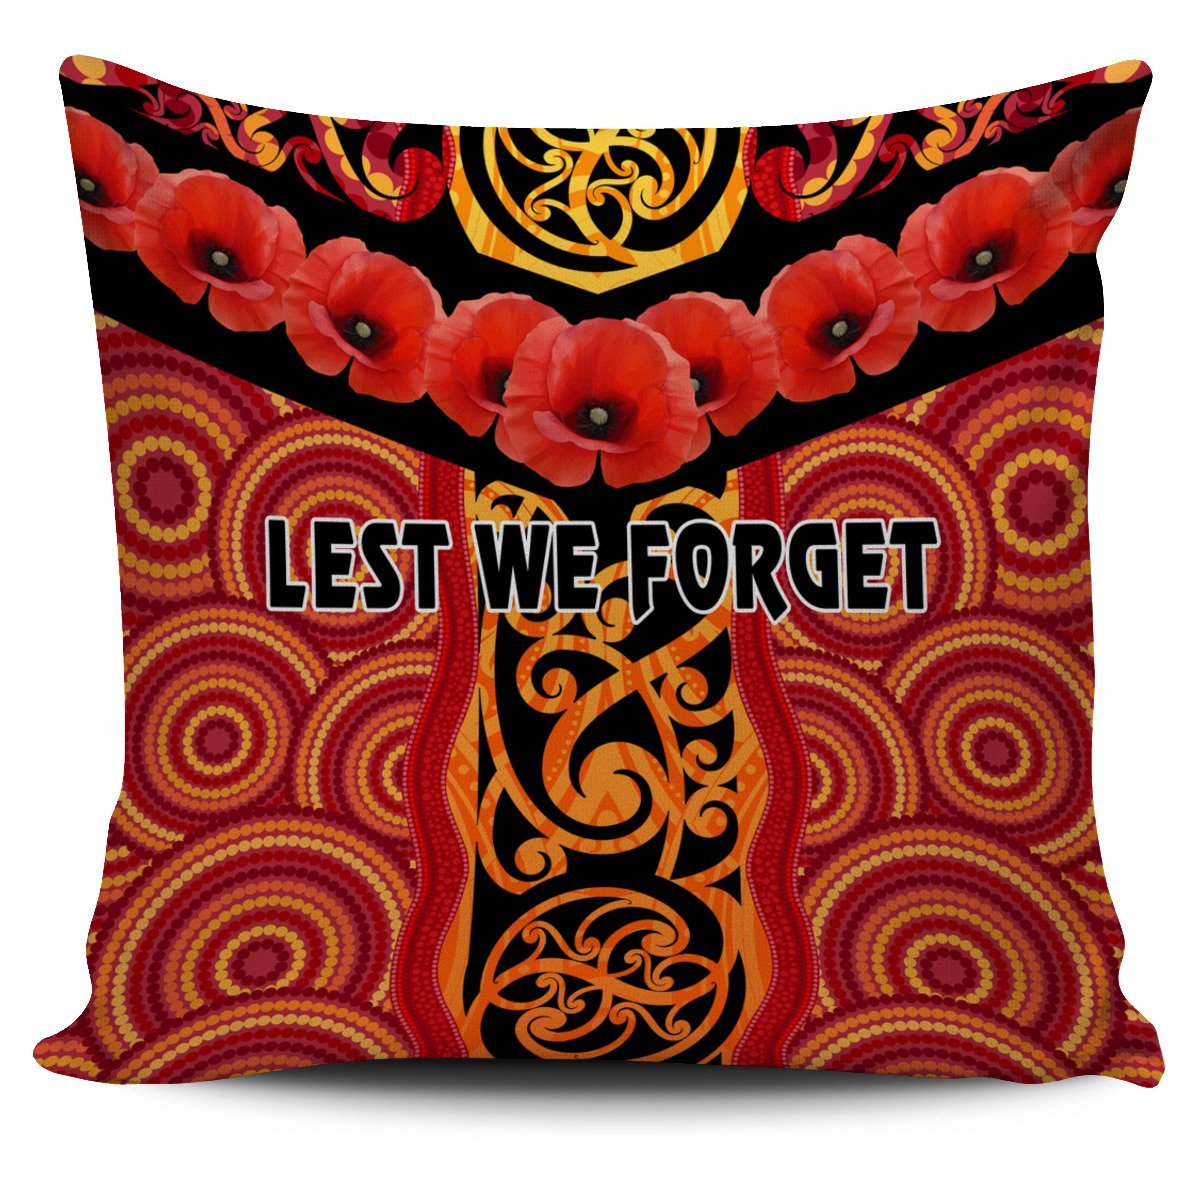 Anzac Lest We Forget Poppy Pillow Cover New Zealand Maori Silver Fern - Australia Aboriginal Pillow Cover One Size Red - Polynesian Pride